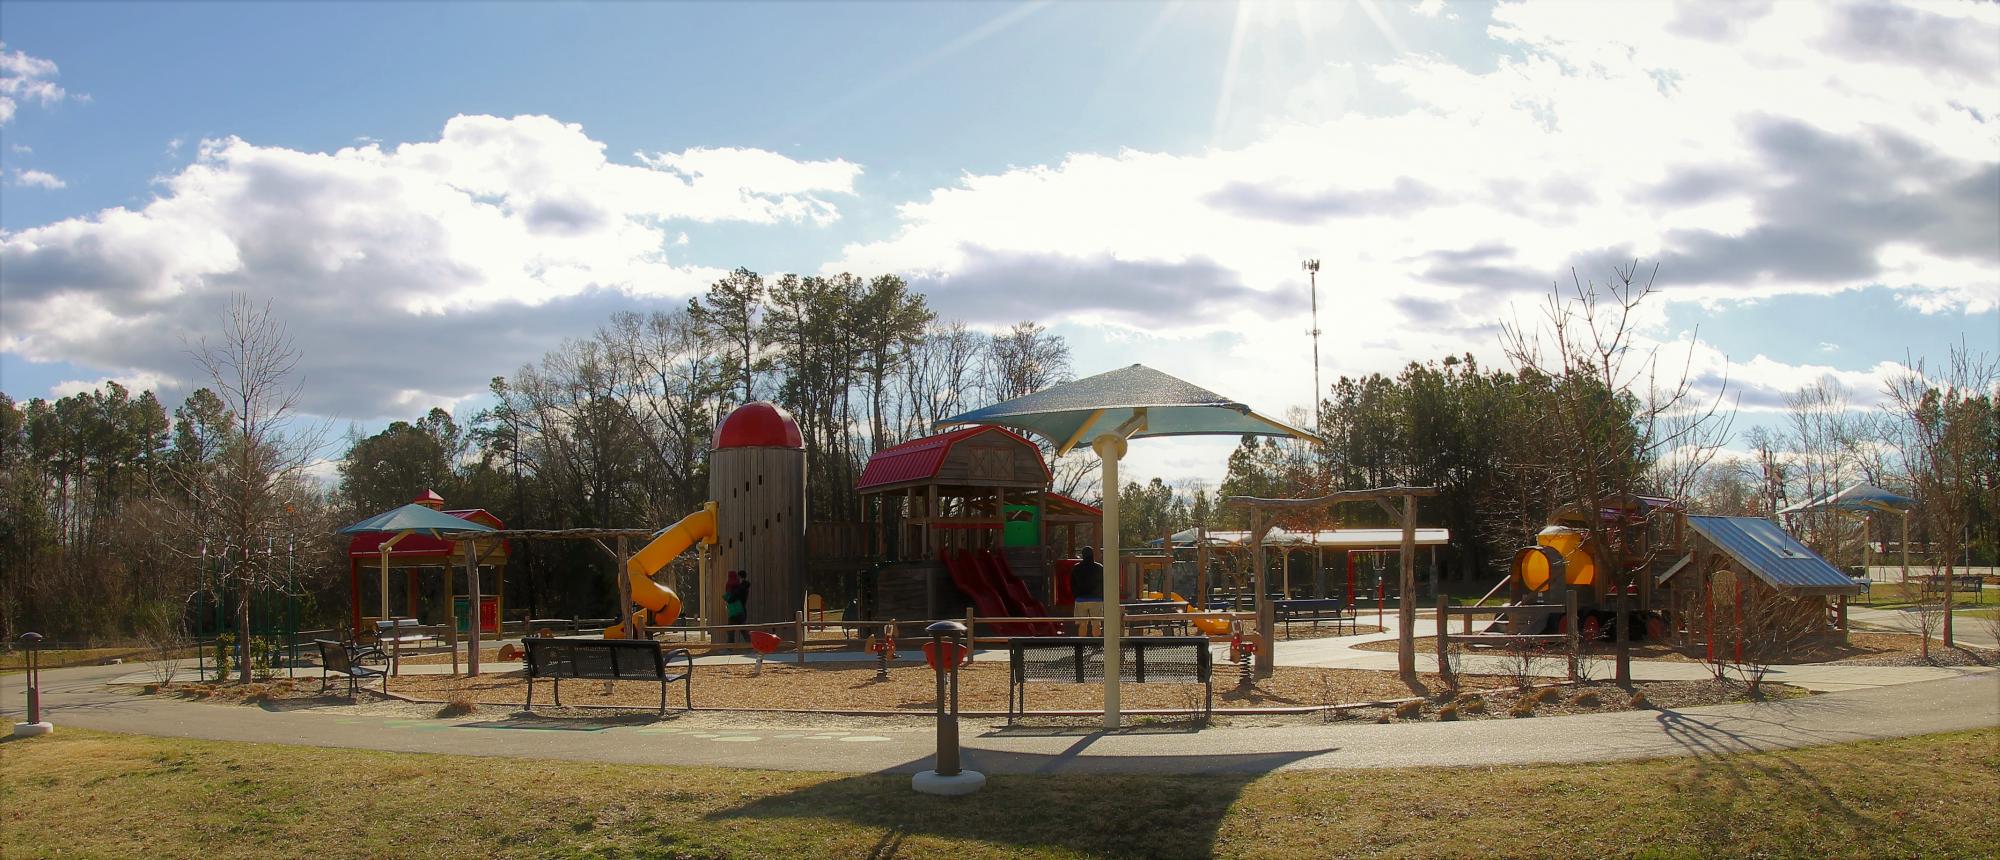 Playground equipment at Knightdale Station Park in Knightdale, NC